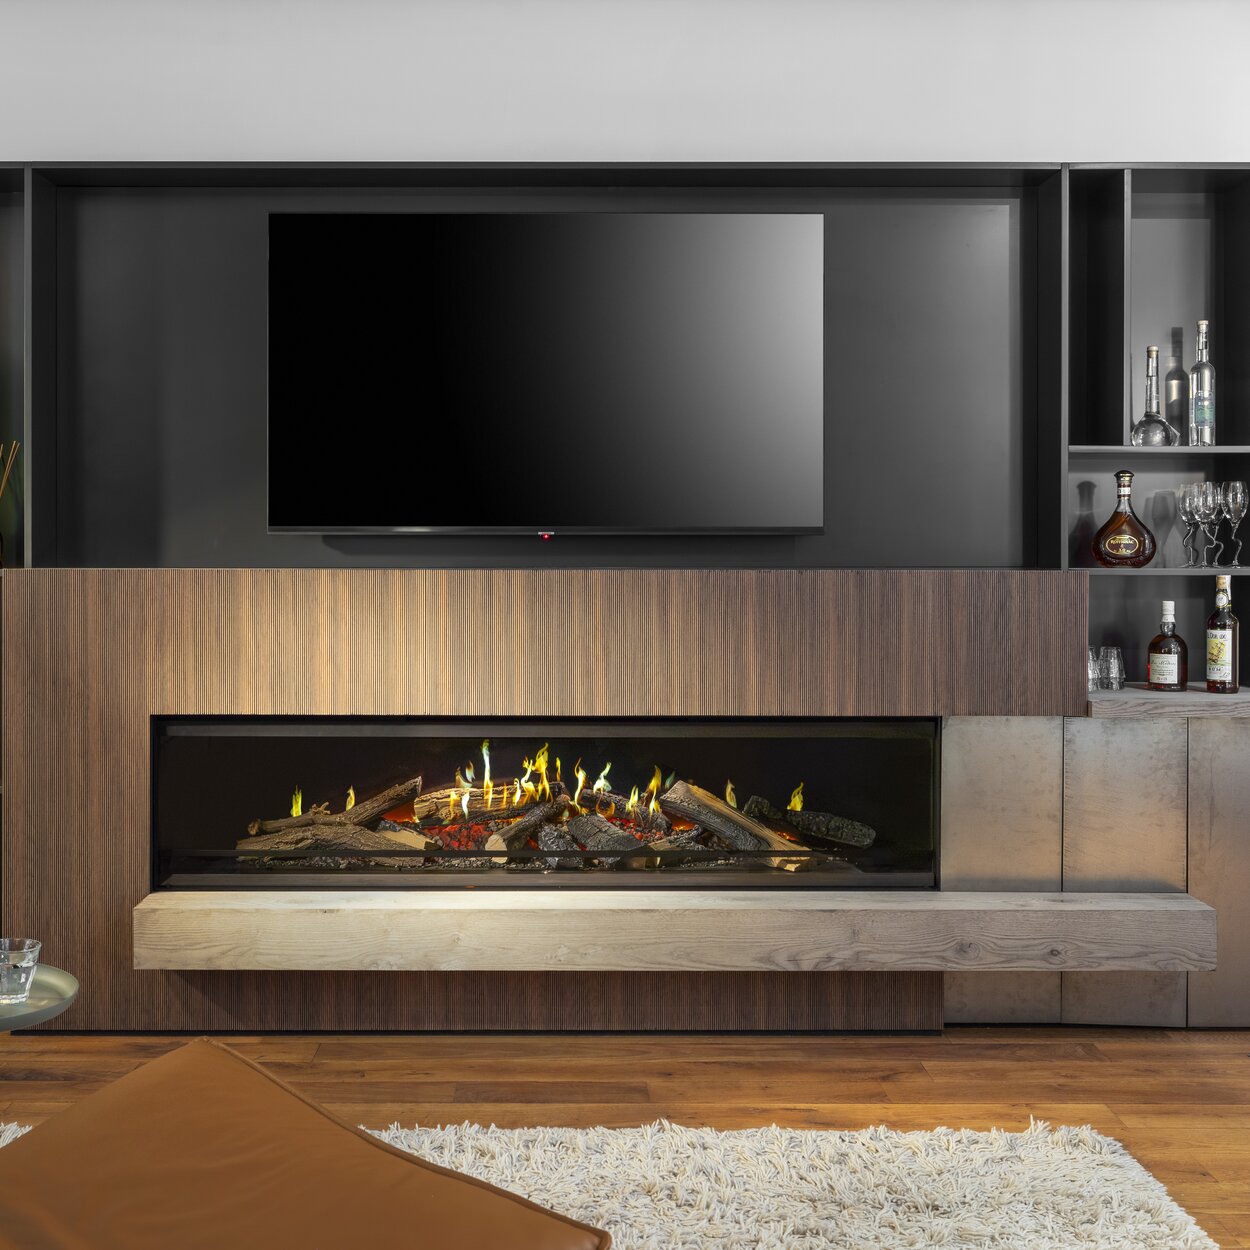 The widest electric fireplace E-One 190 F from Kalfire built into a wooden sideboard with TV and drawers.